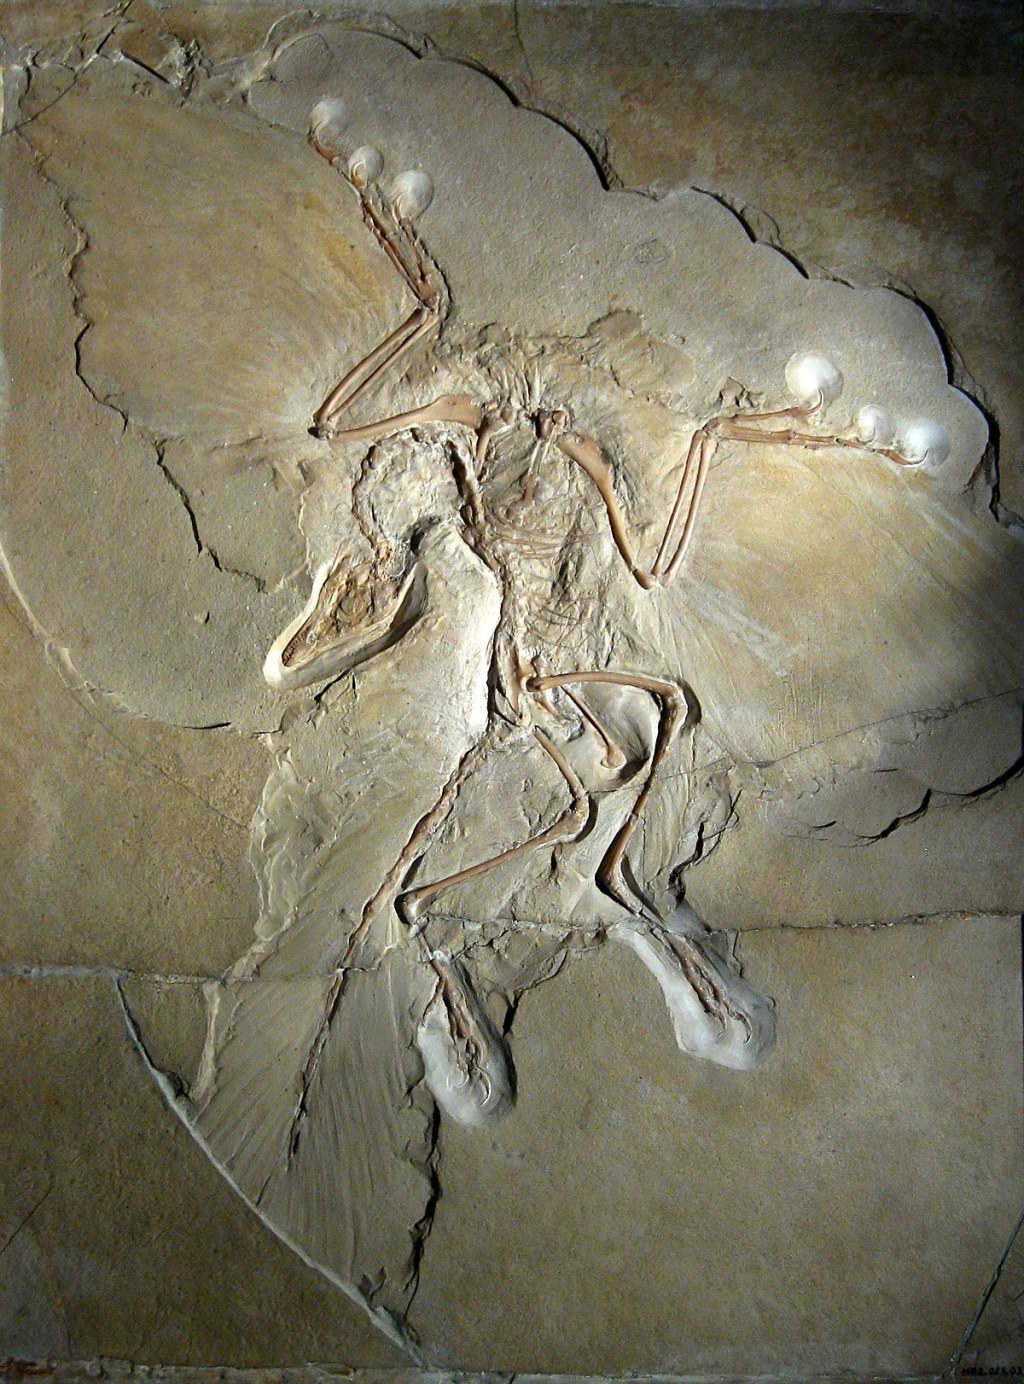 Picture of: Specimens of Archaeopteryx – Wikipedia